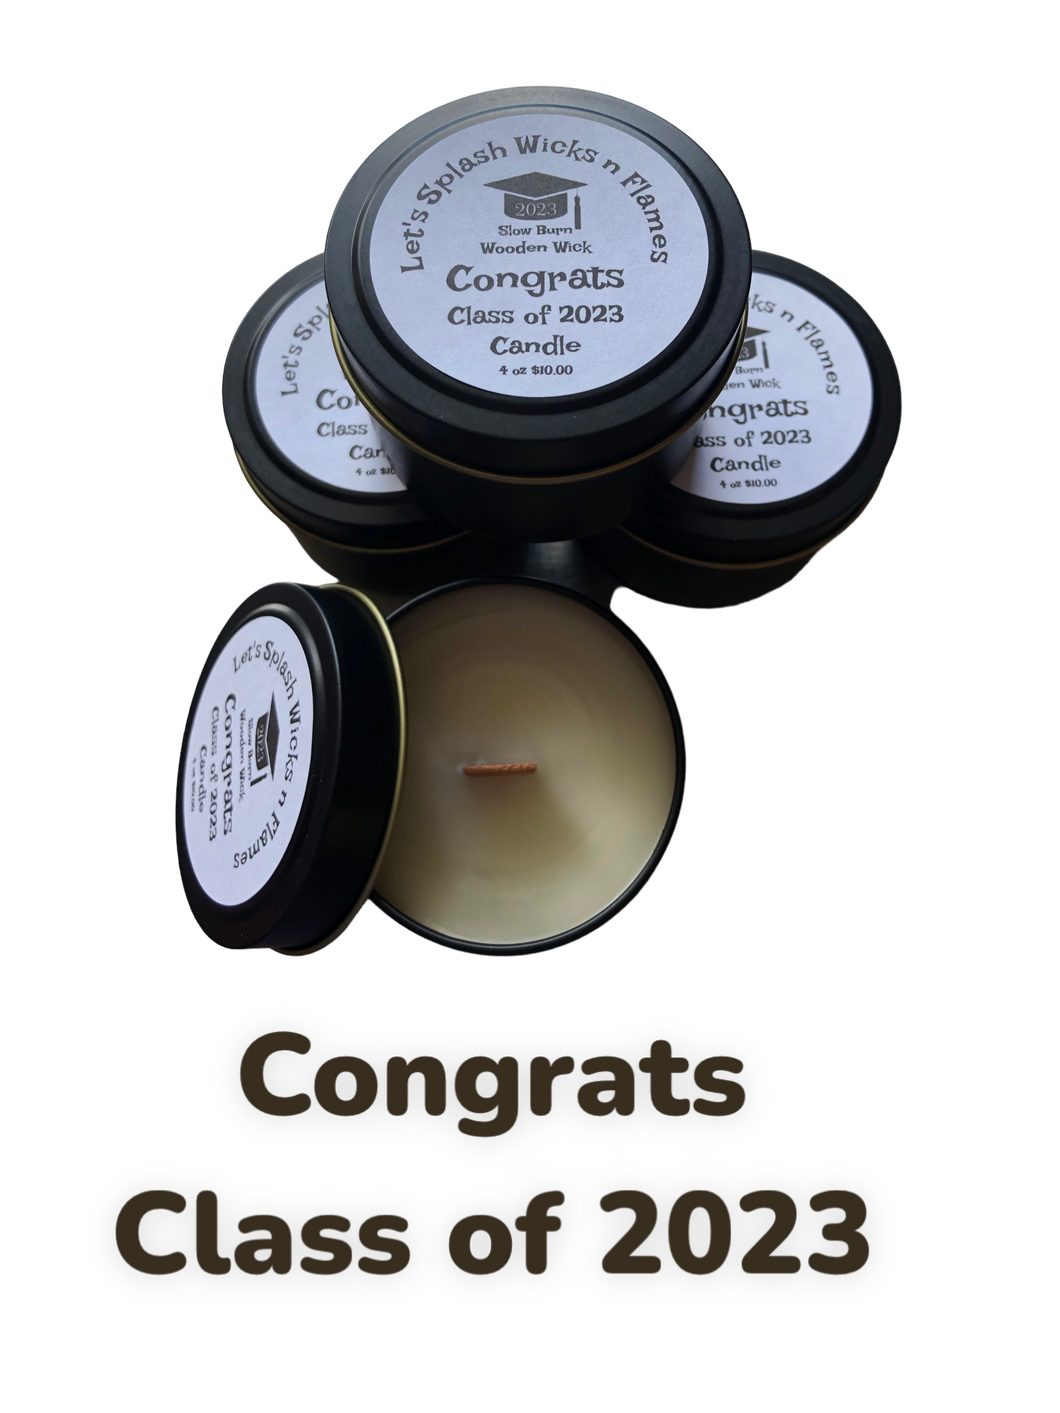 Congrats Class of 2023 Candle